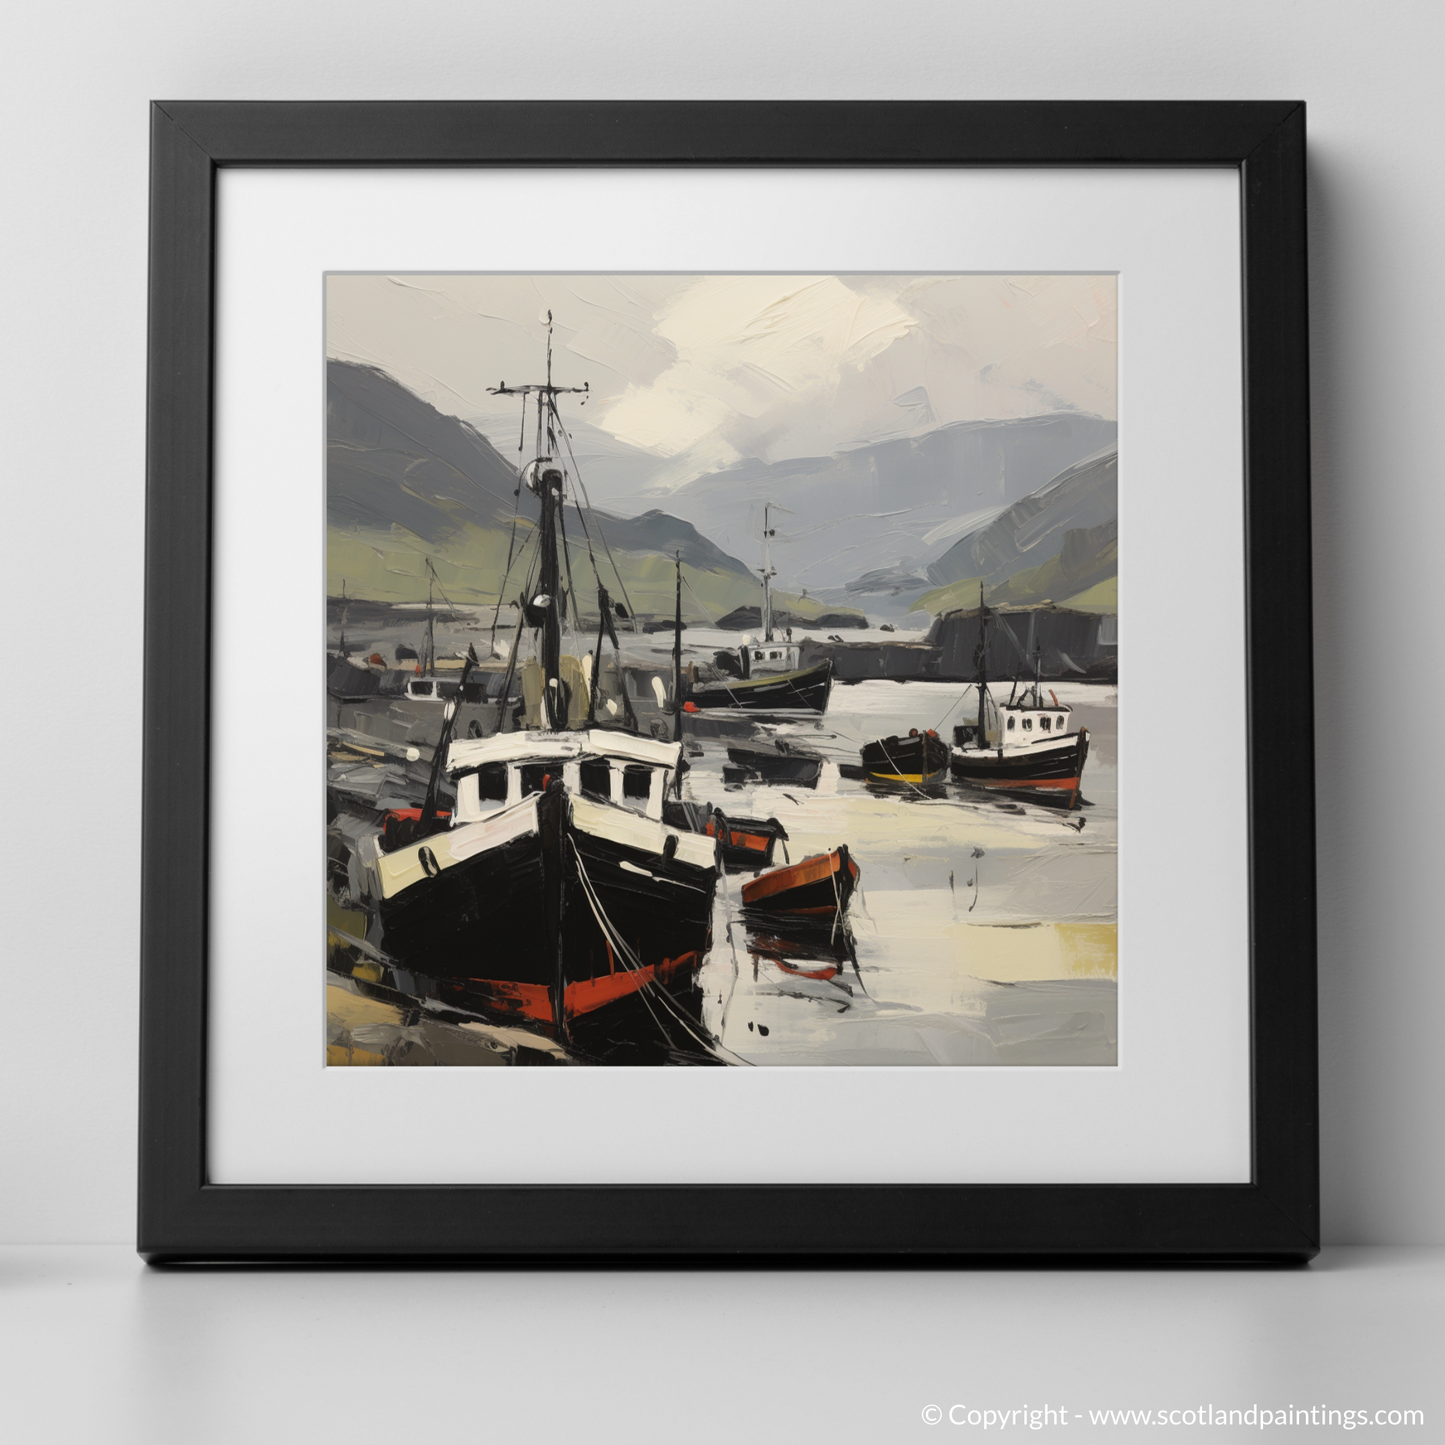 Art Print of Ullapool Harbour with a black frame